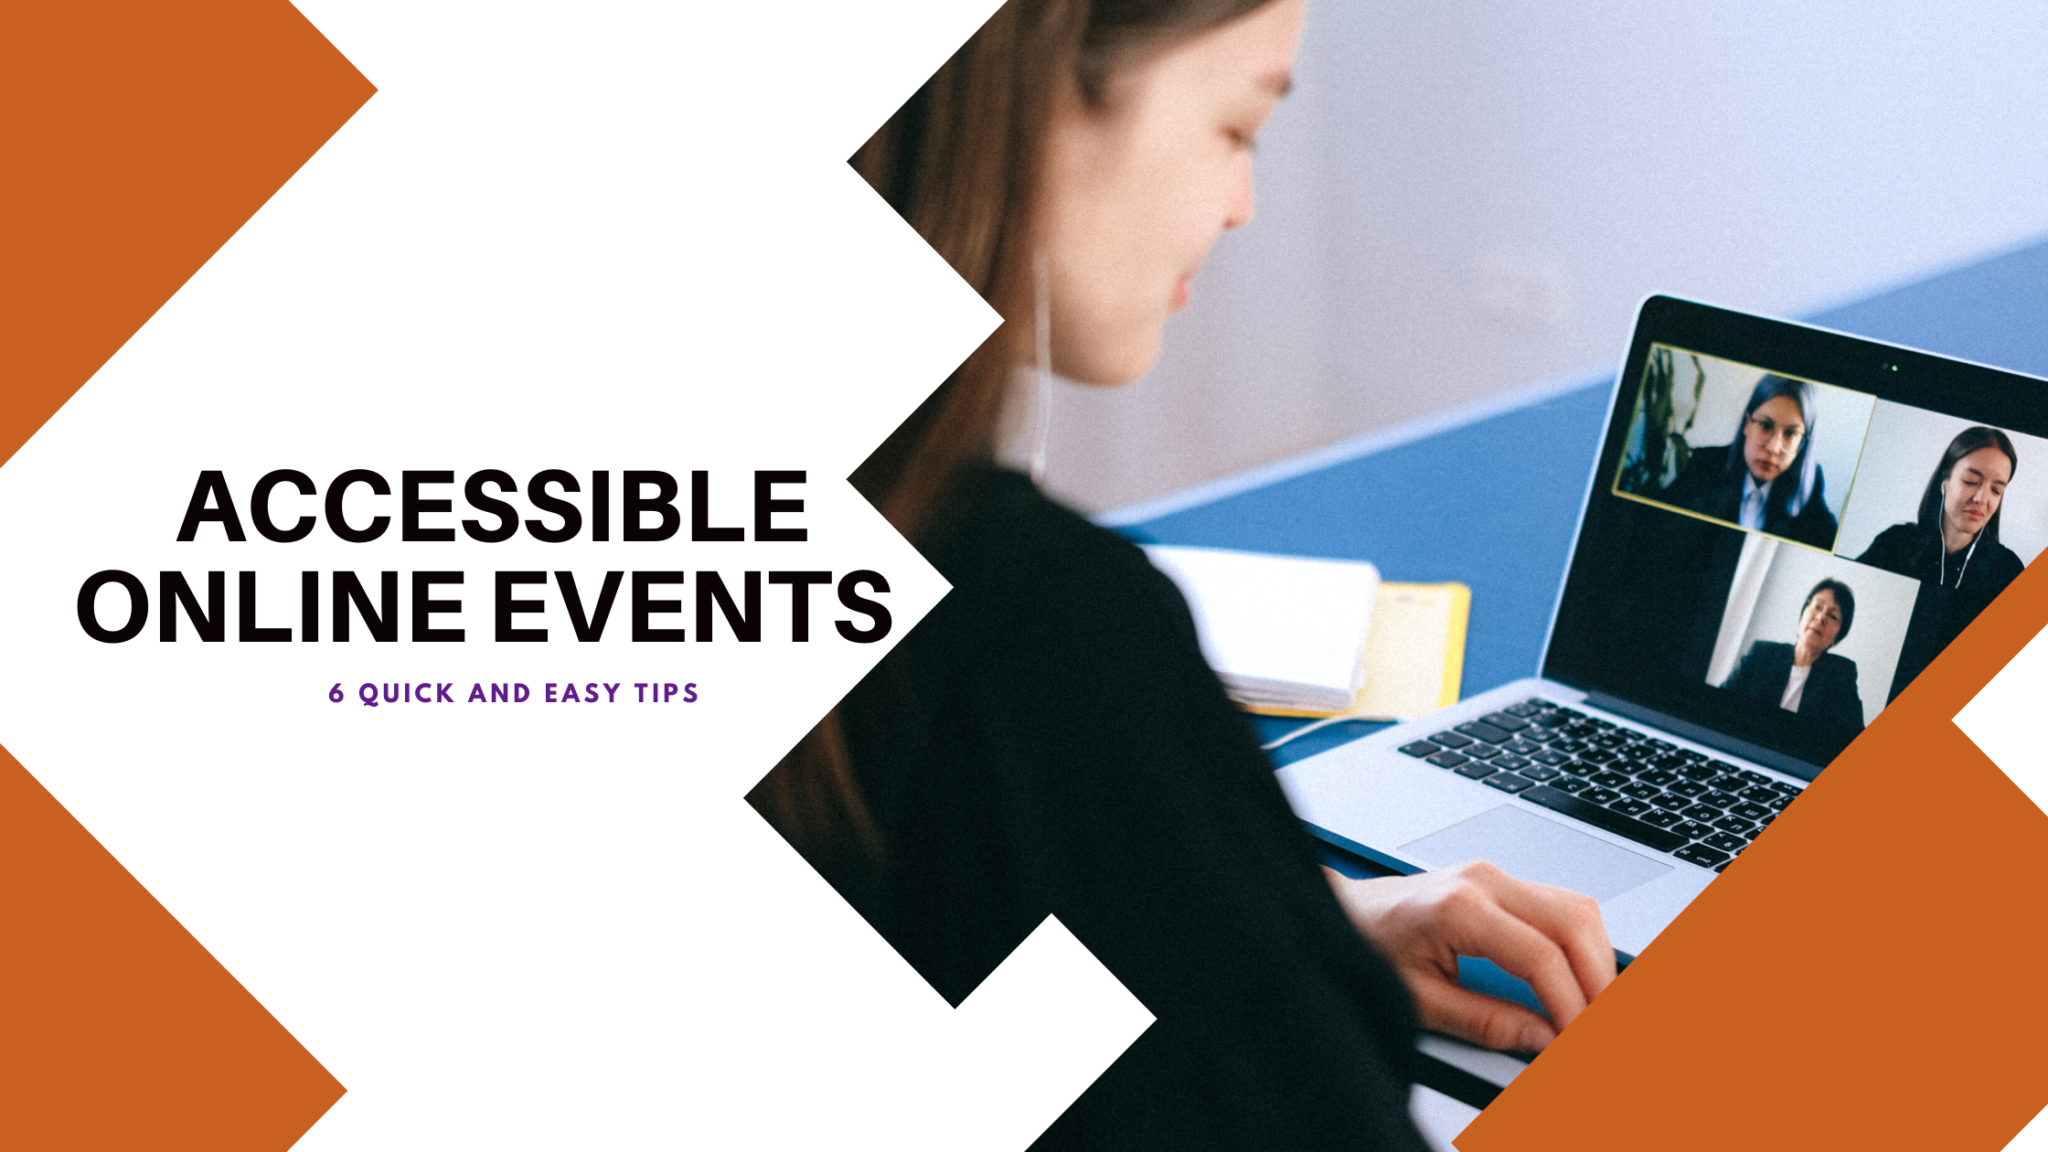 Featured image for “Accessible Online Events – 6 Quick & Easy Tips”